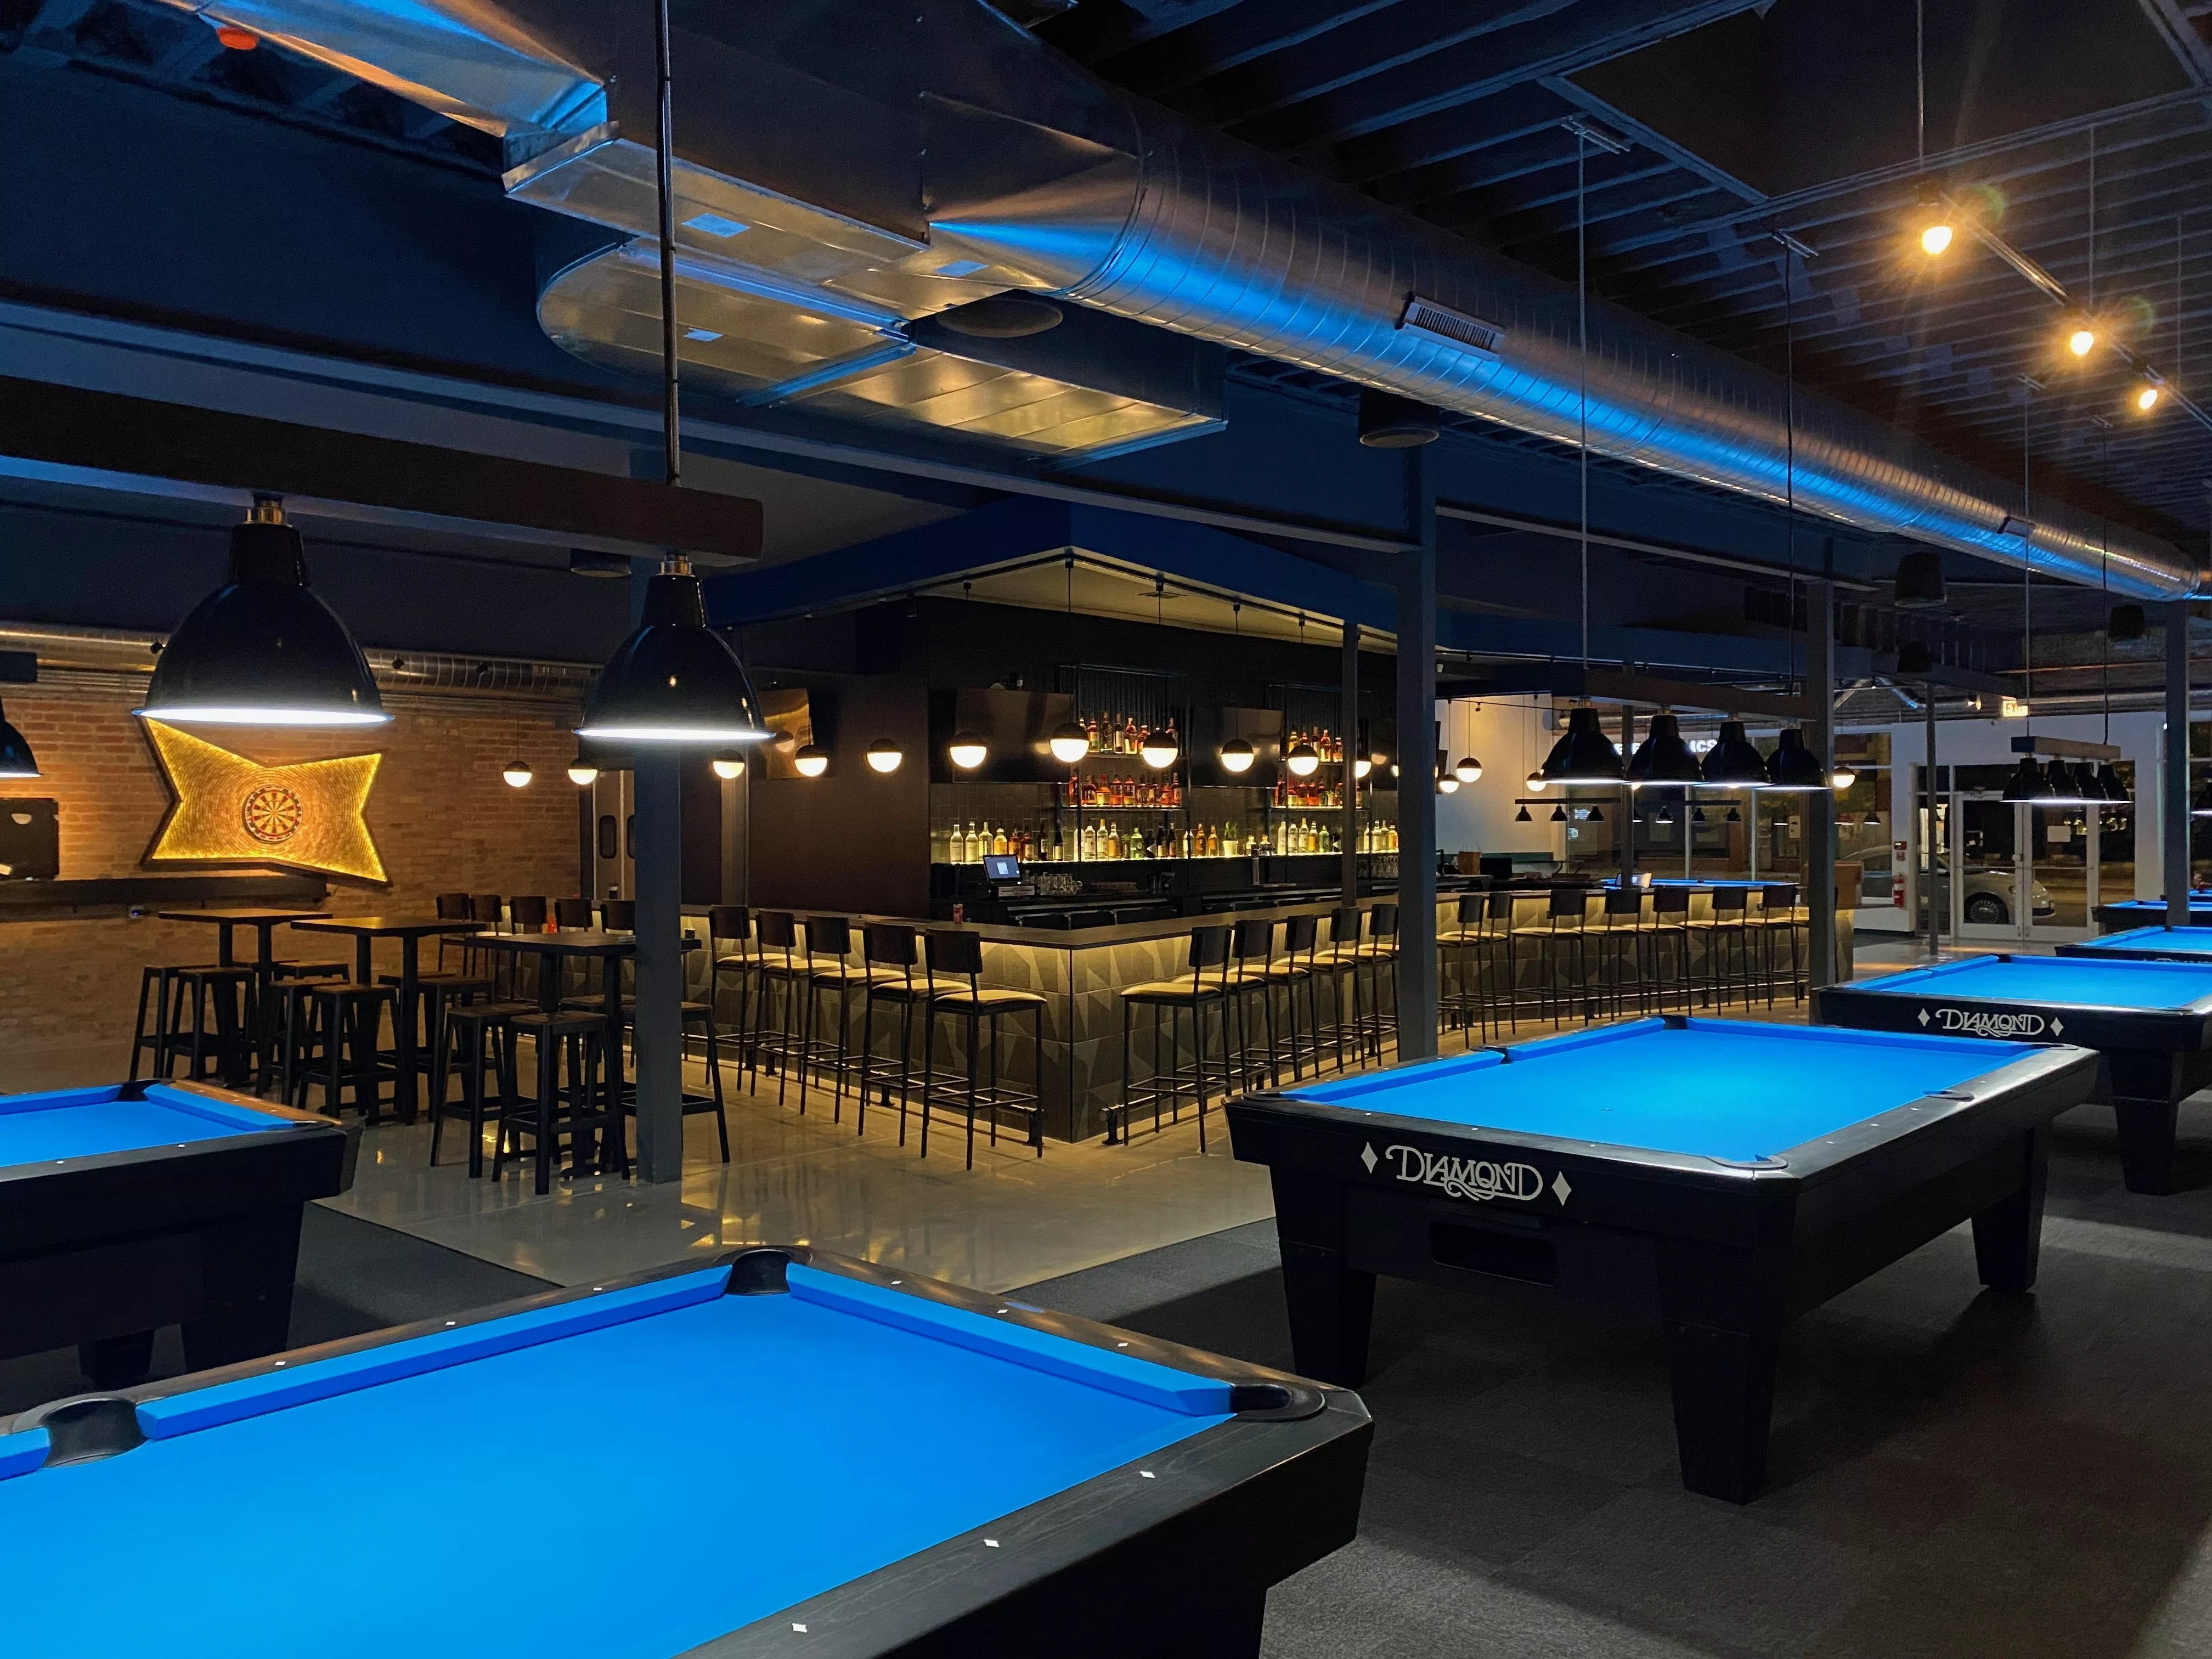 The Pool Bar in Netherlands, Europe | Bars,Billiards - Rated 3.9